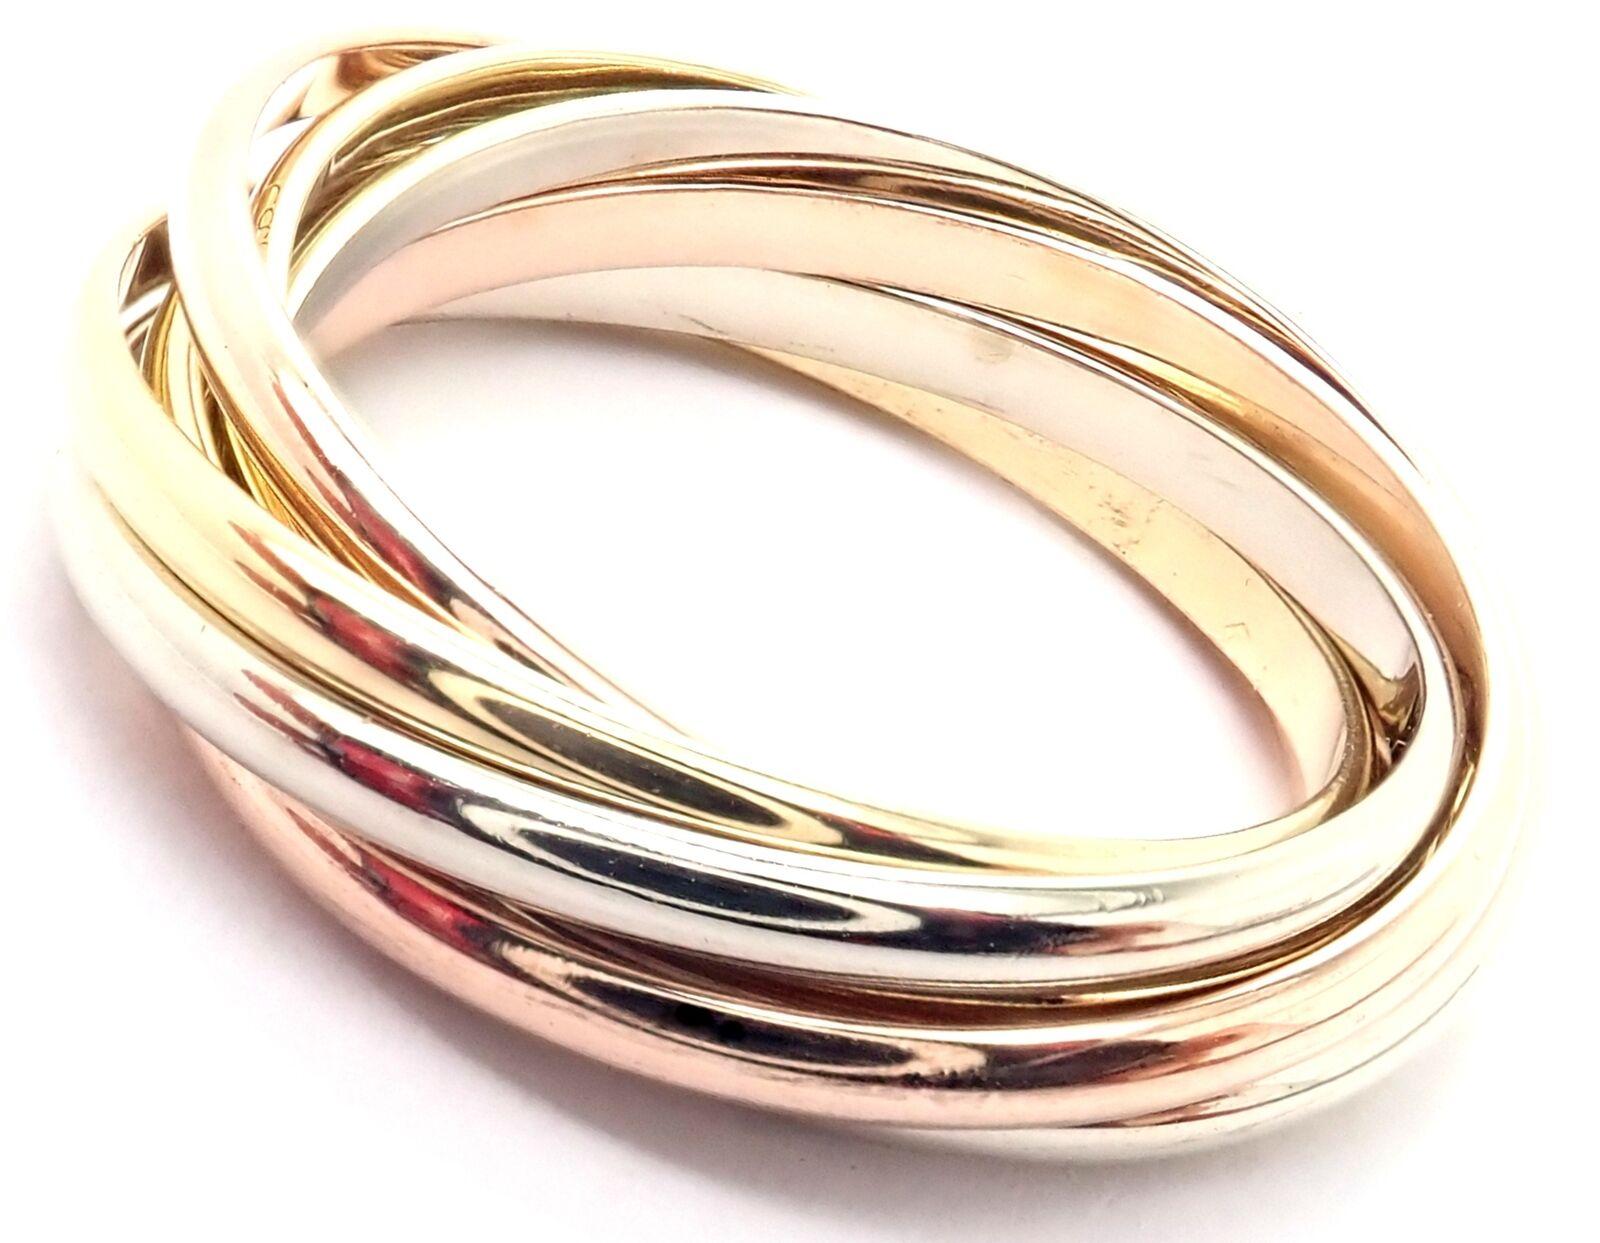 18k Tri-Color Gold Trinity 7 Band Ring by Cartier.
This ring comes with Cartier certificate of authenticity.
Details:
Ring Size: European Size 55, US Size 7 1/4
Band Width: 6mm
Weight:  7.5 grams
Stamped Hallmarks: Cartier 750 55 French Hallmarks
